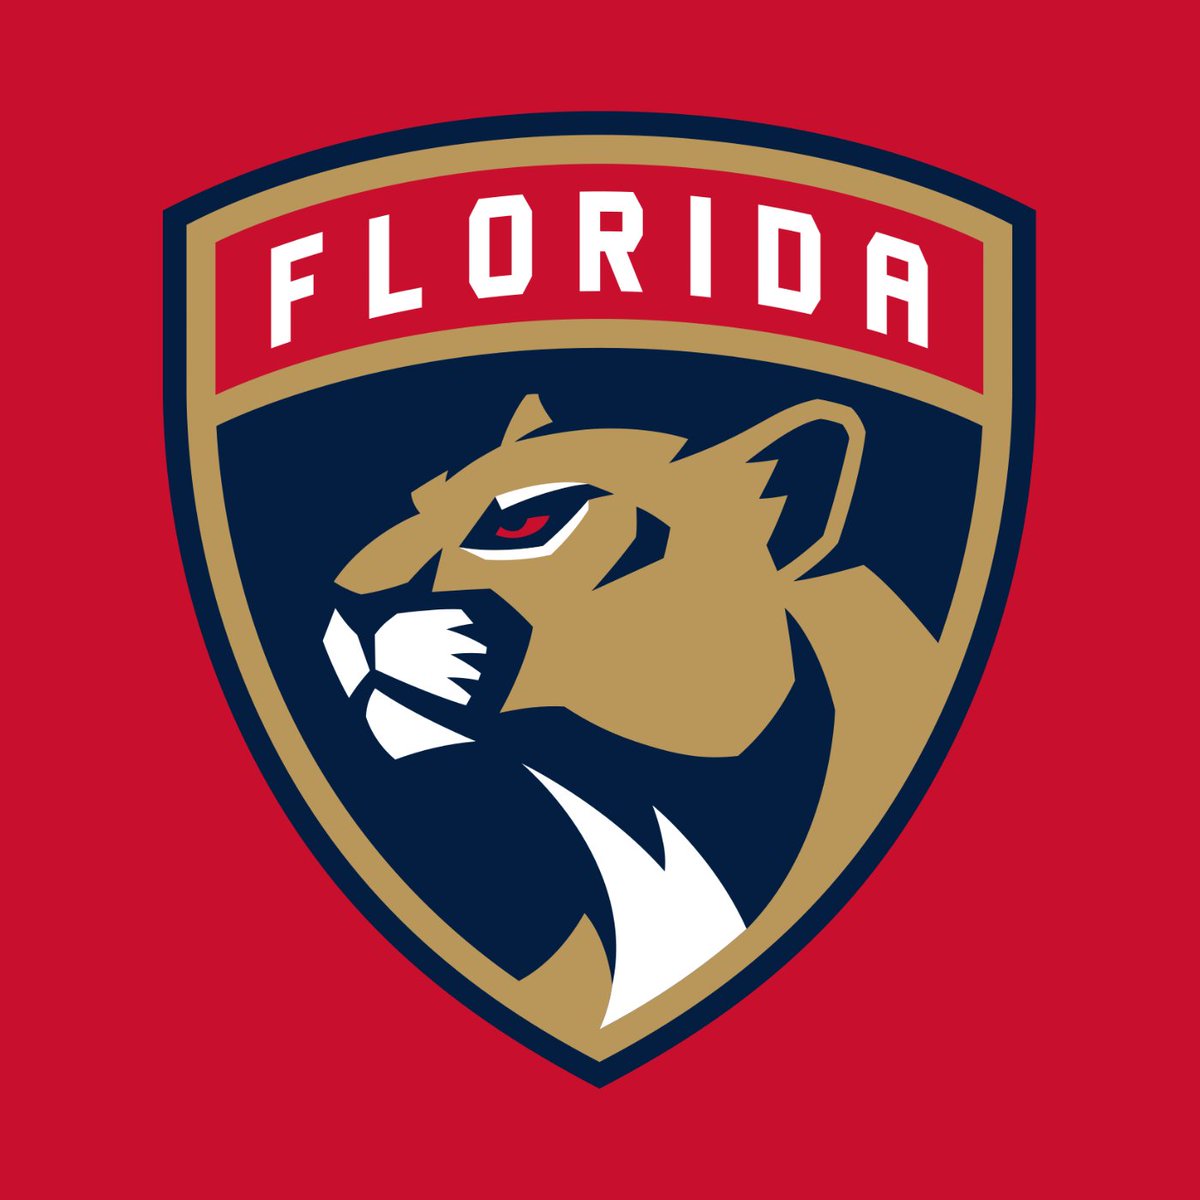 With the 184th overall selection in the NHL Draft, the Florida Panthers are proud to select: Timmy's Dad. https://t.co/5SRHzZlSph